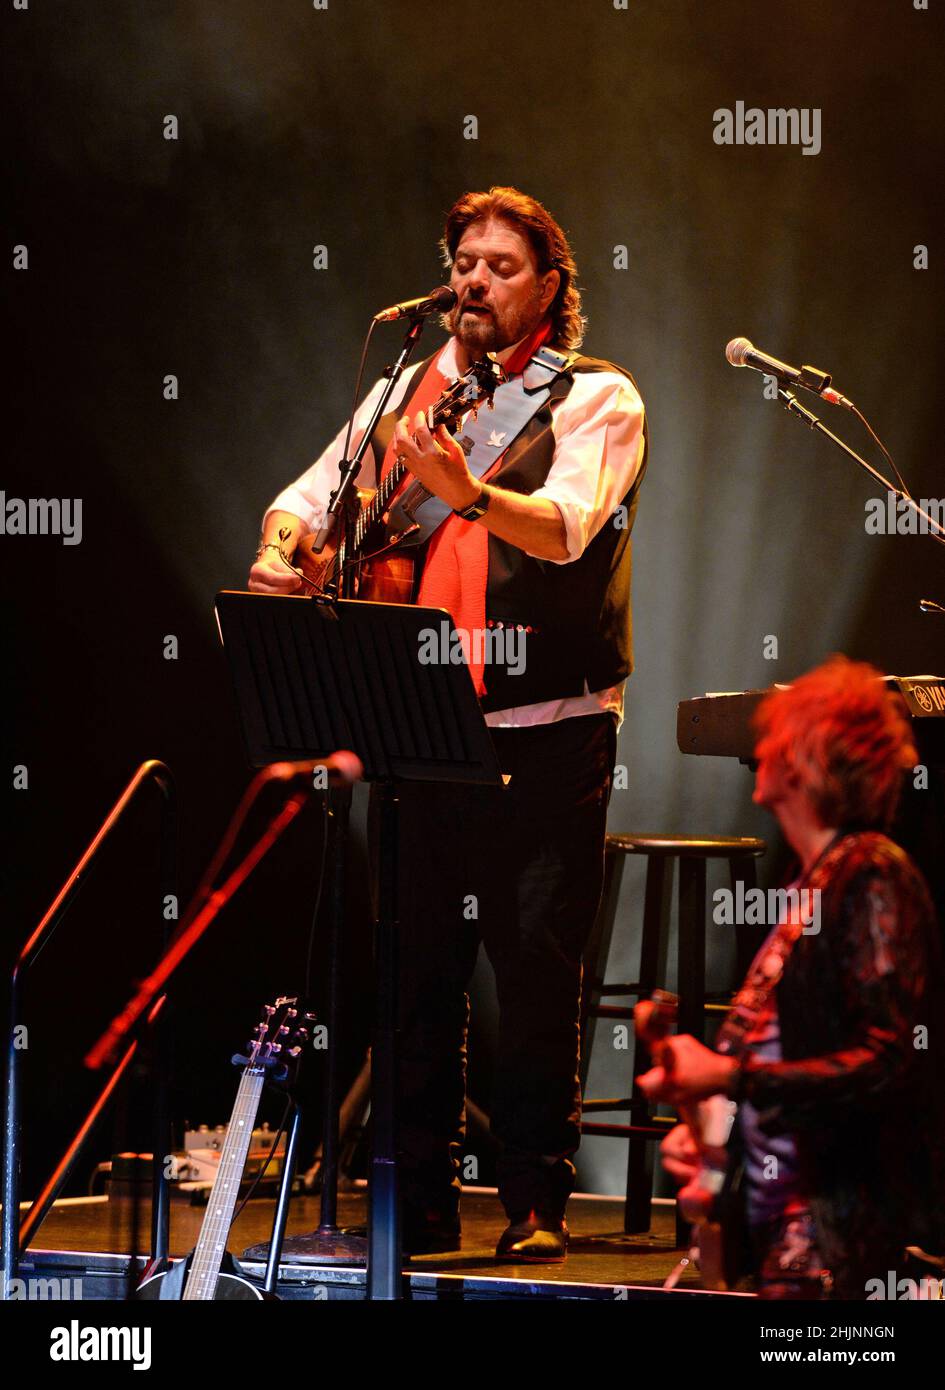 Fort Lauderdale FL, USA. 30th Jan, 2022. Alan Parsons performs at The Broward Center for the Performing Arts on January 30, 2022 in Fort Lauderdale, Florida. Credit: Mpi04/Media Punch/Alamy Live News Stock Photo